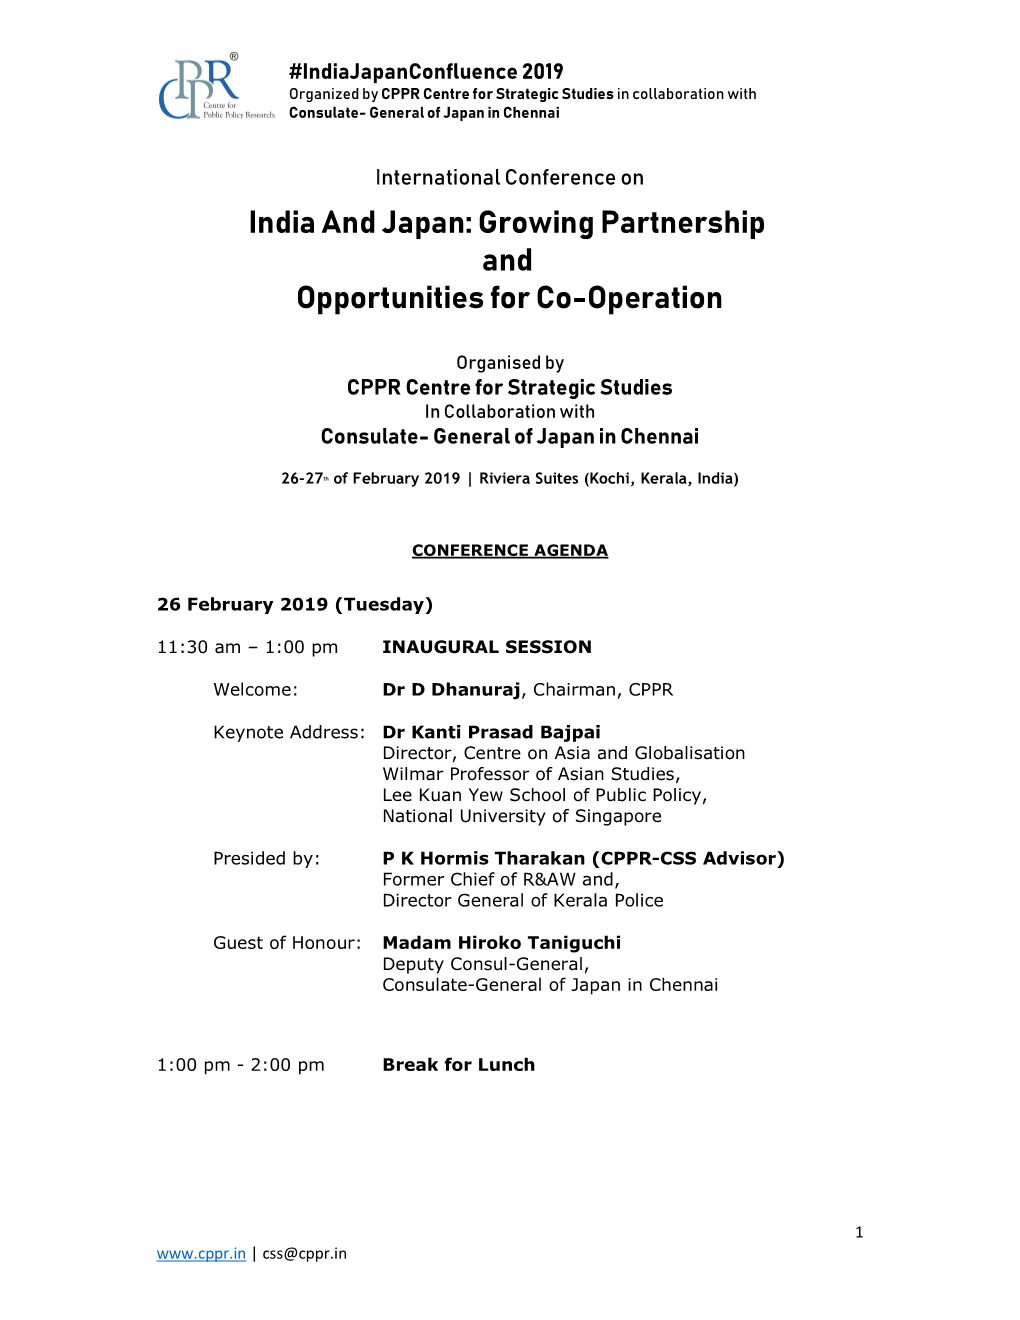 India and Japan: Growing Partnership and Opportunities for Co-Operation